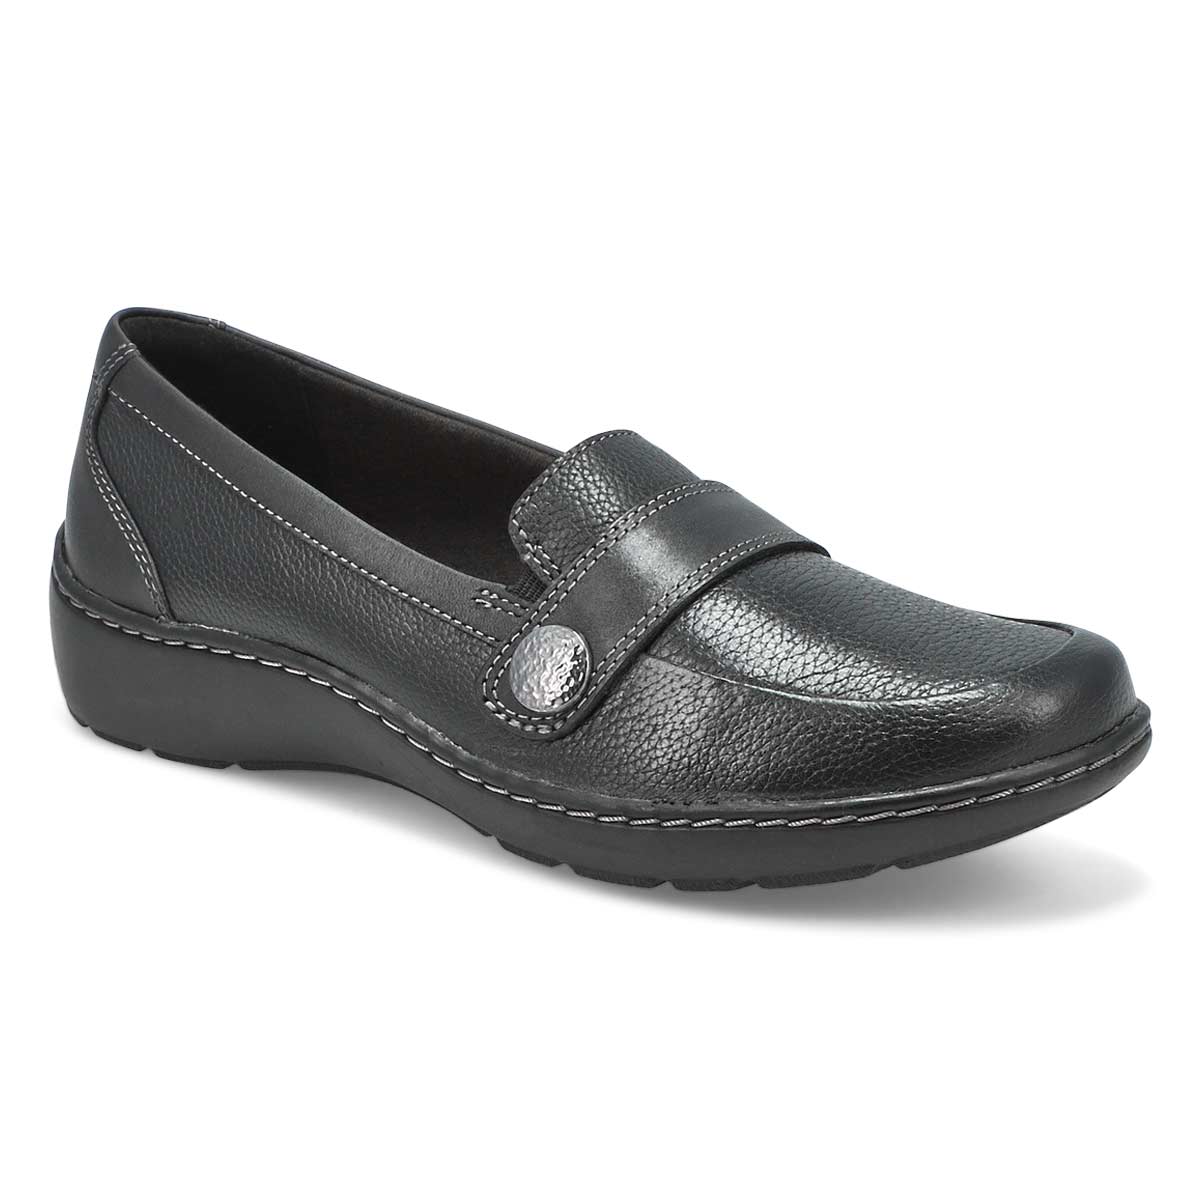 Clarks Women's Cora Daisy Wide Casual Loafer | SoftMoc.com